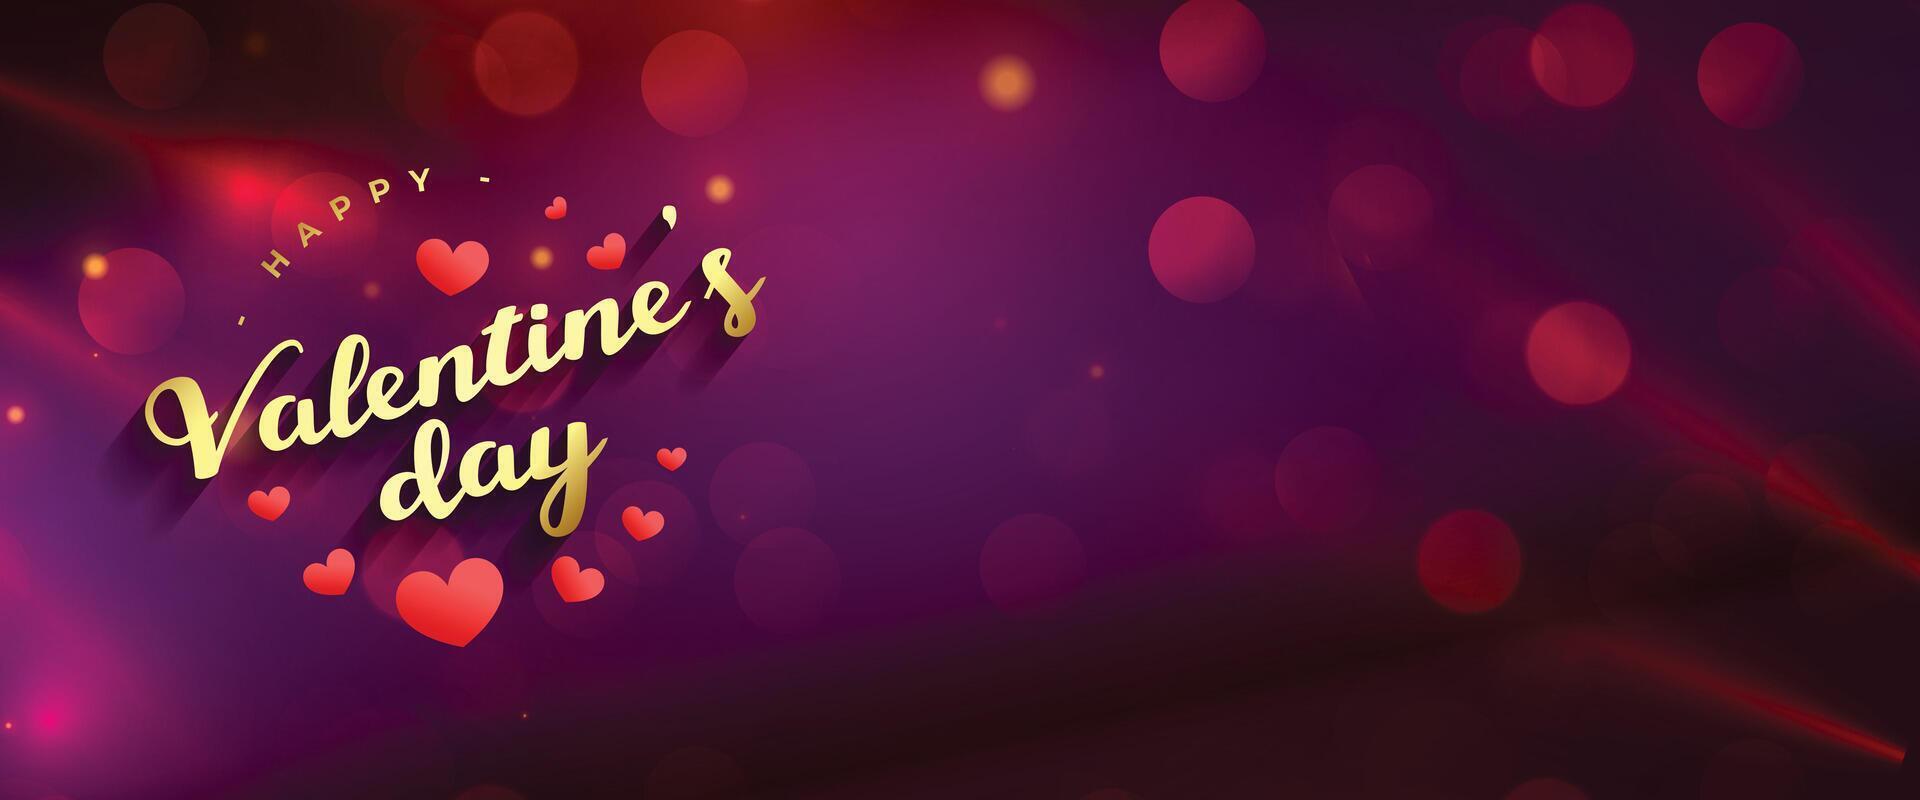 romantic bokeh banner for your valentines day media posts vector